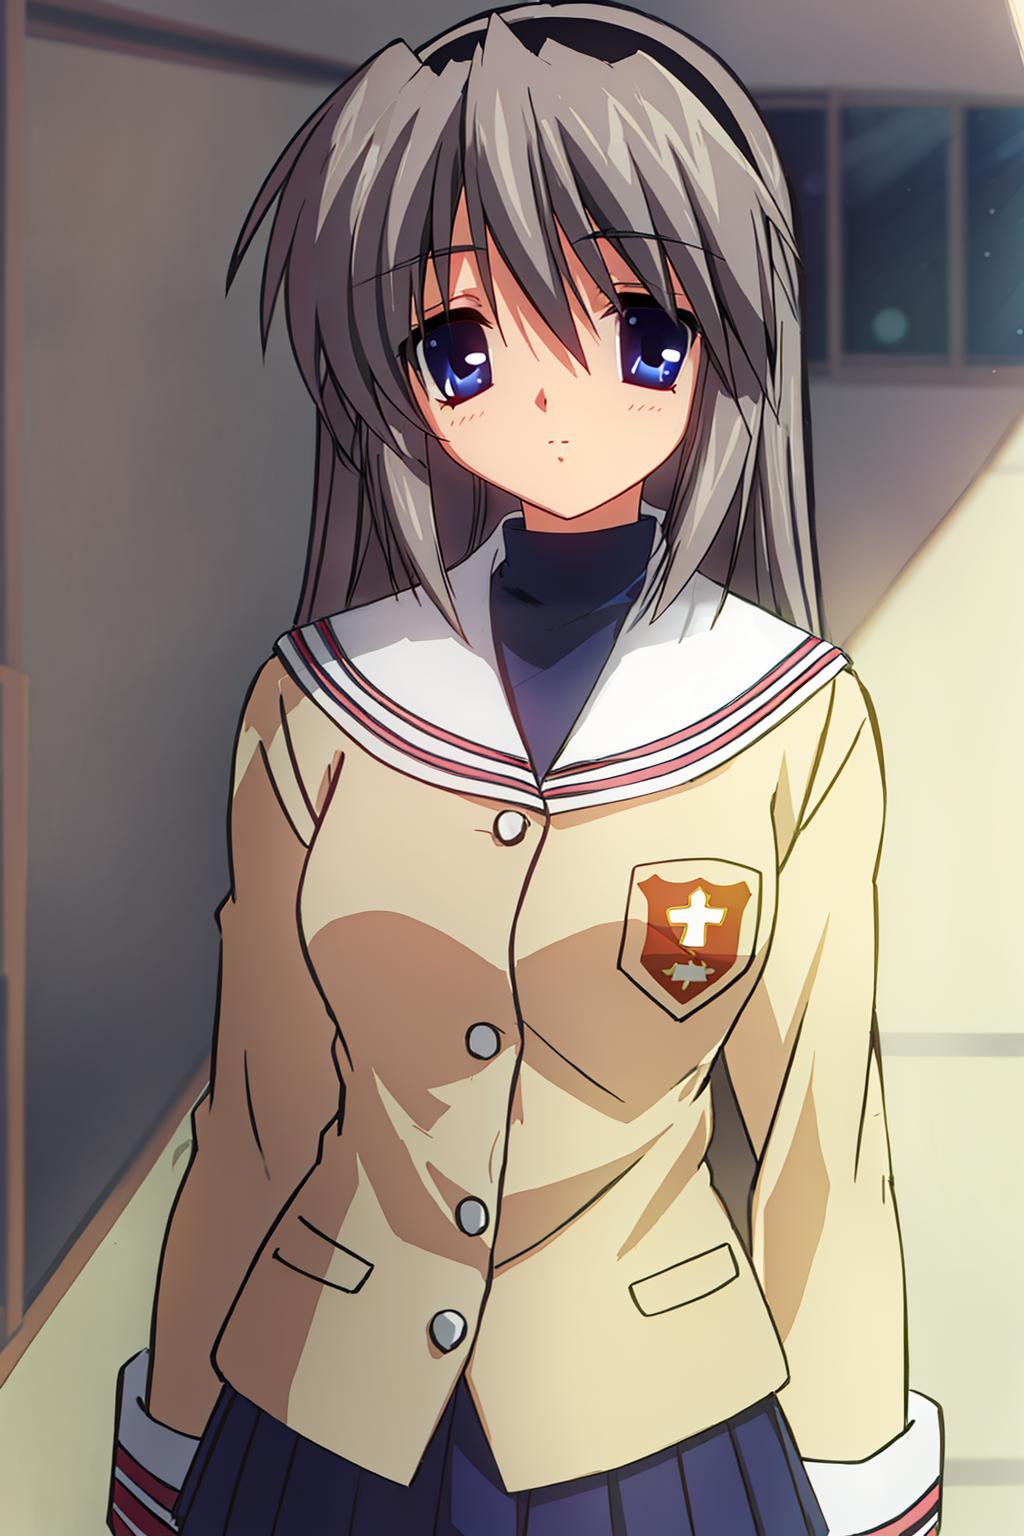 What is an explanation of the Clannad ending? - Quora